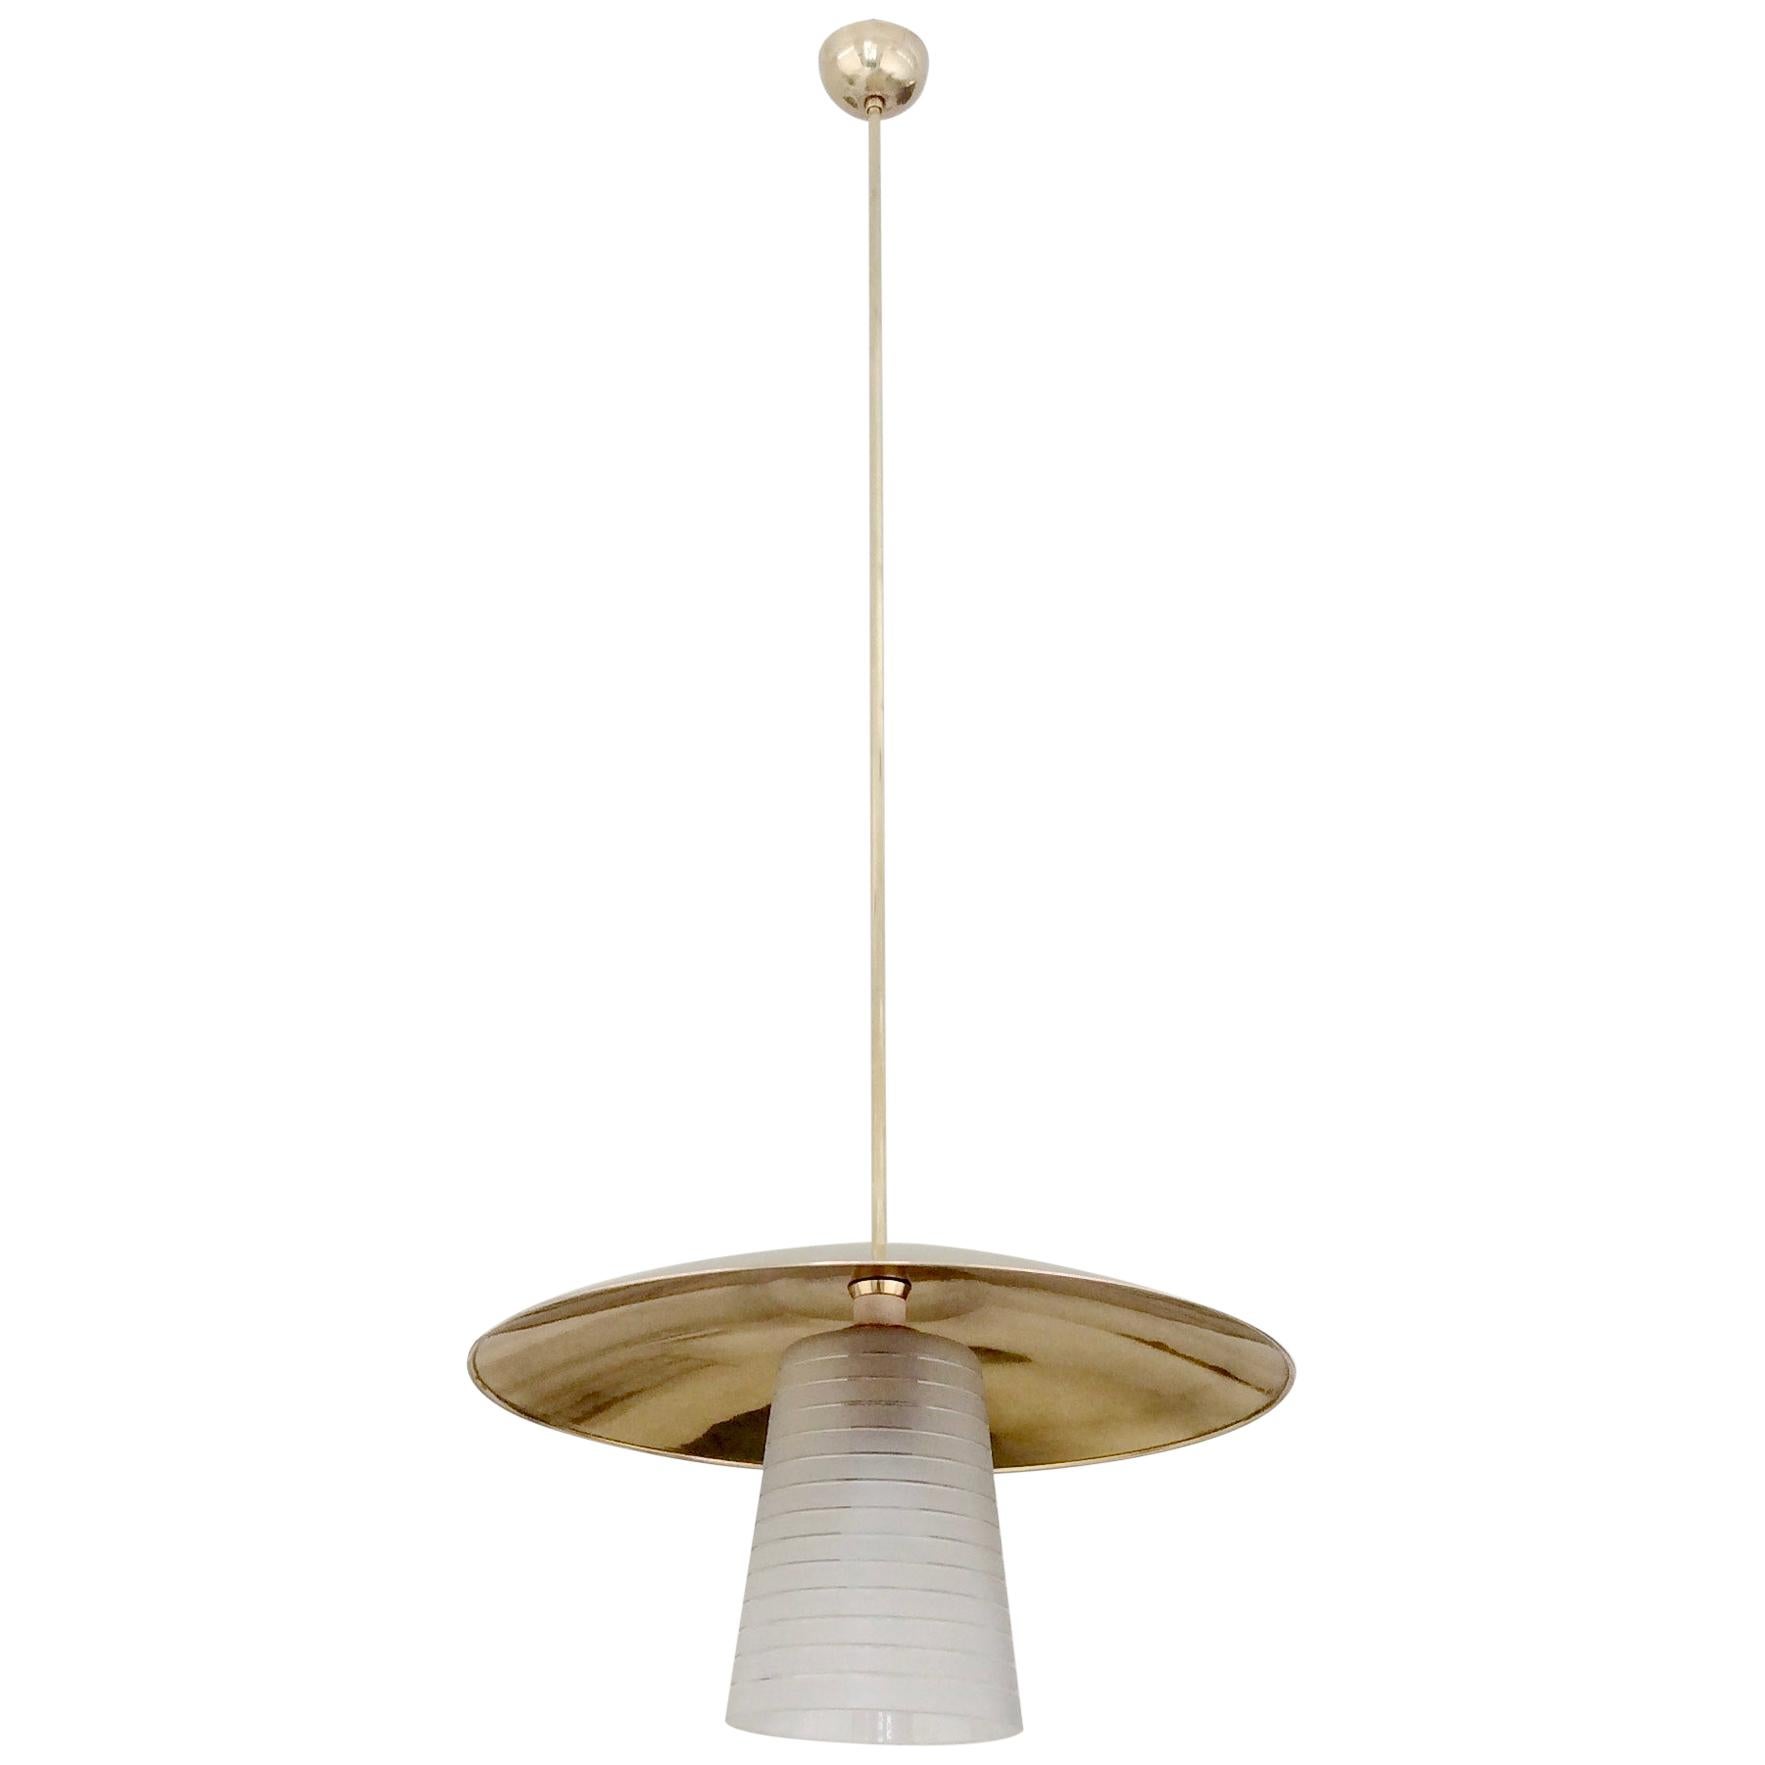 Italian Hanging Lamp, Brass And Frosted Glass, circa 1950